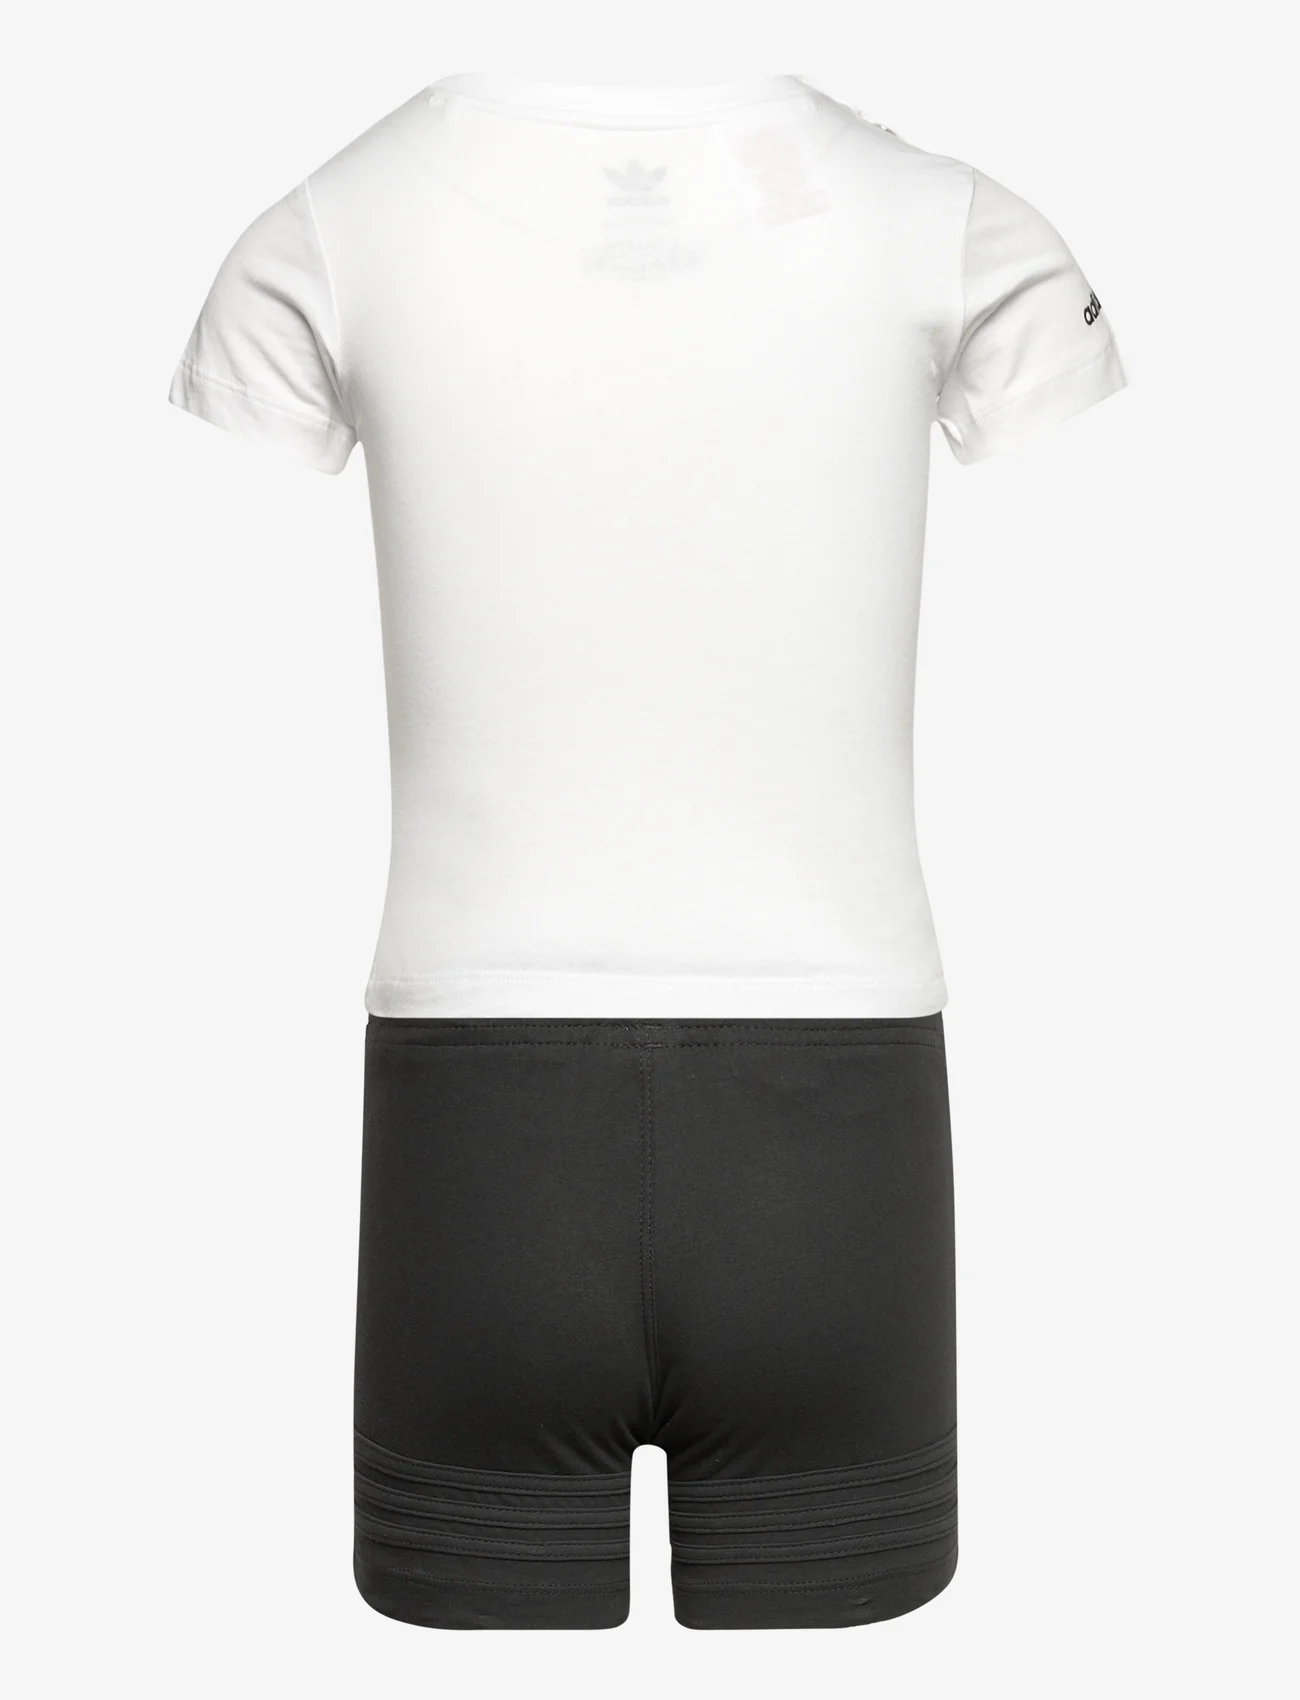 adidas Originals - SPRT Collection Shorts and Tee Set - sets with short-sleeved t-shirt - white - 1